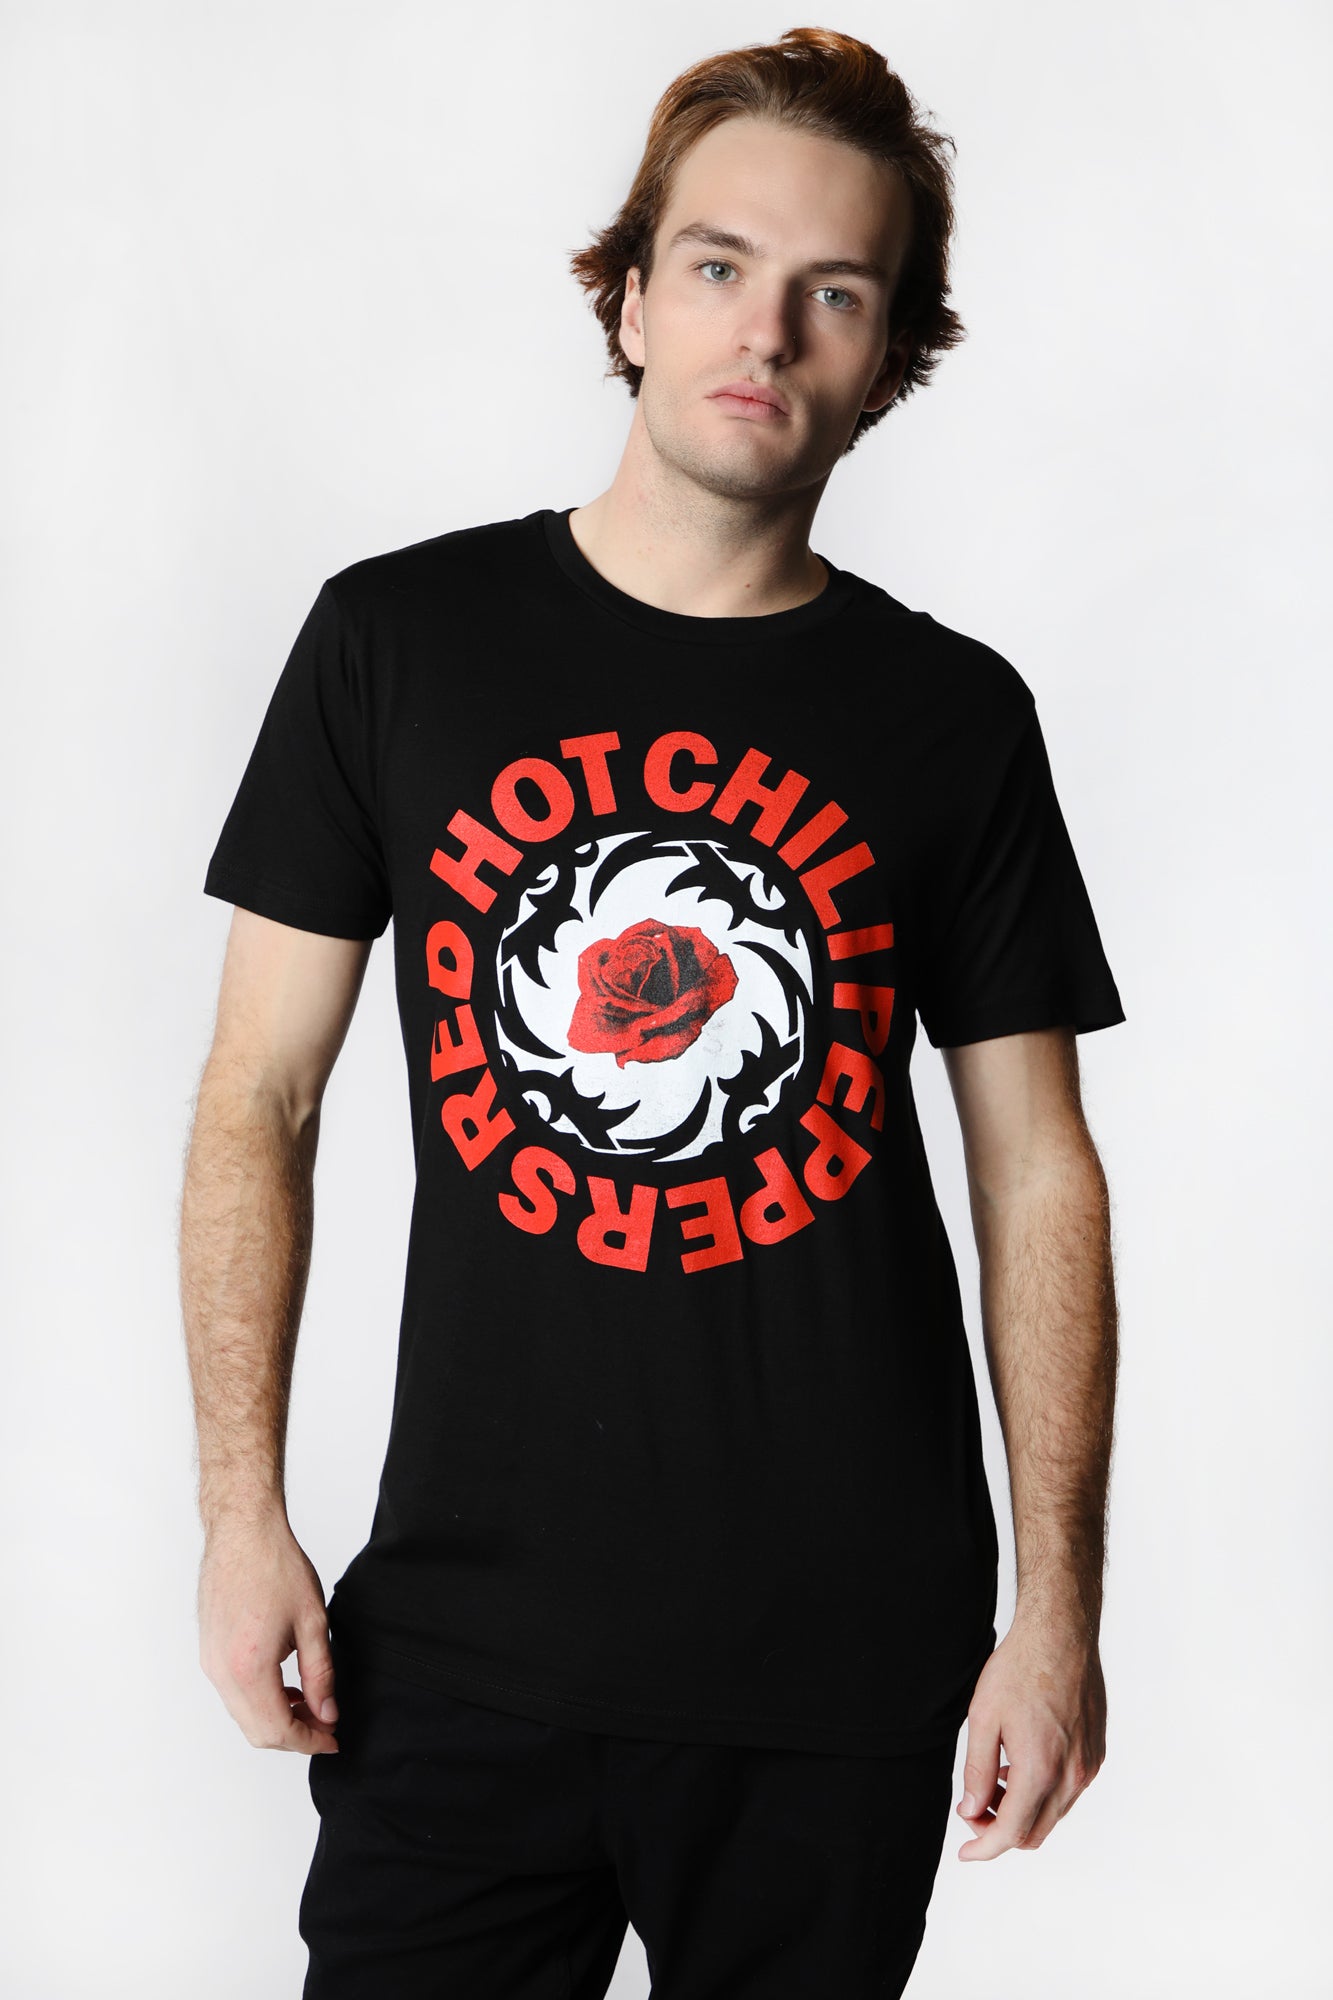 Mens Red Hot Chili Peppers Thorn Rose T-Shirt - Black /